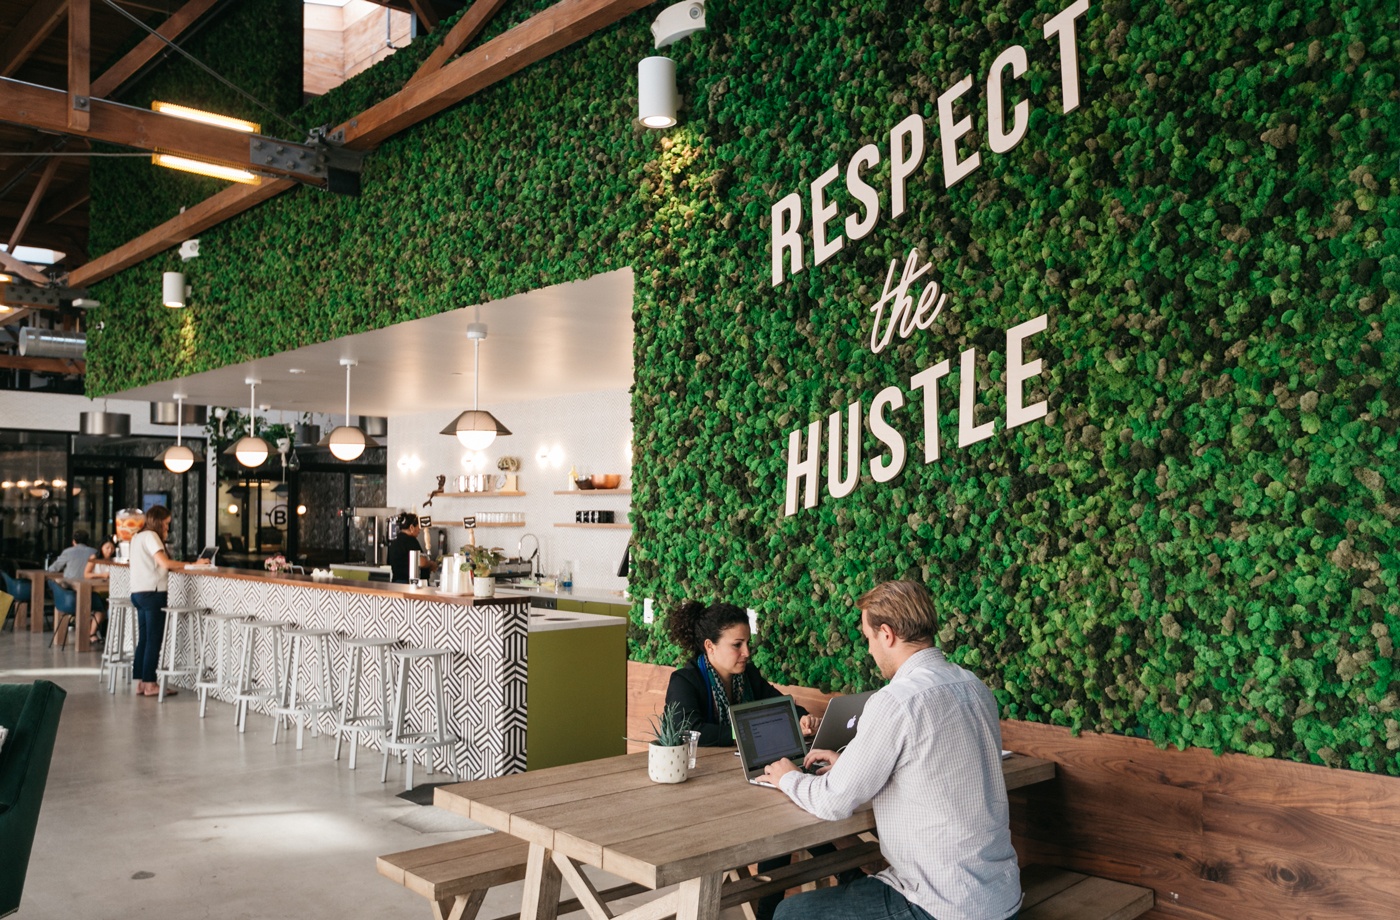 Meat-free is now a WeWork sustainability policy